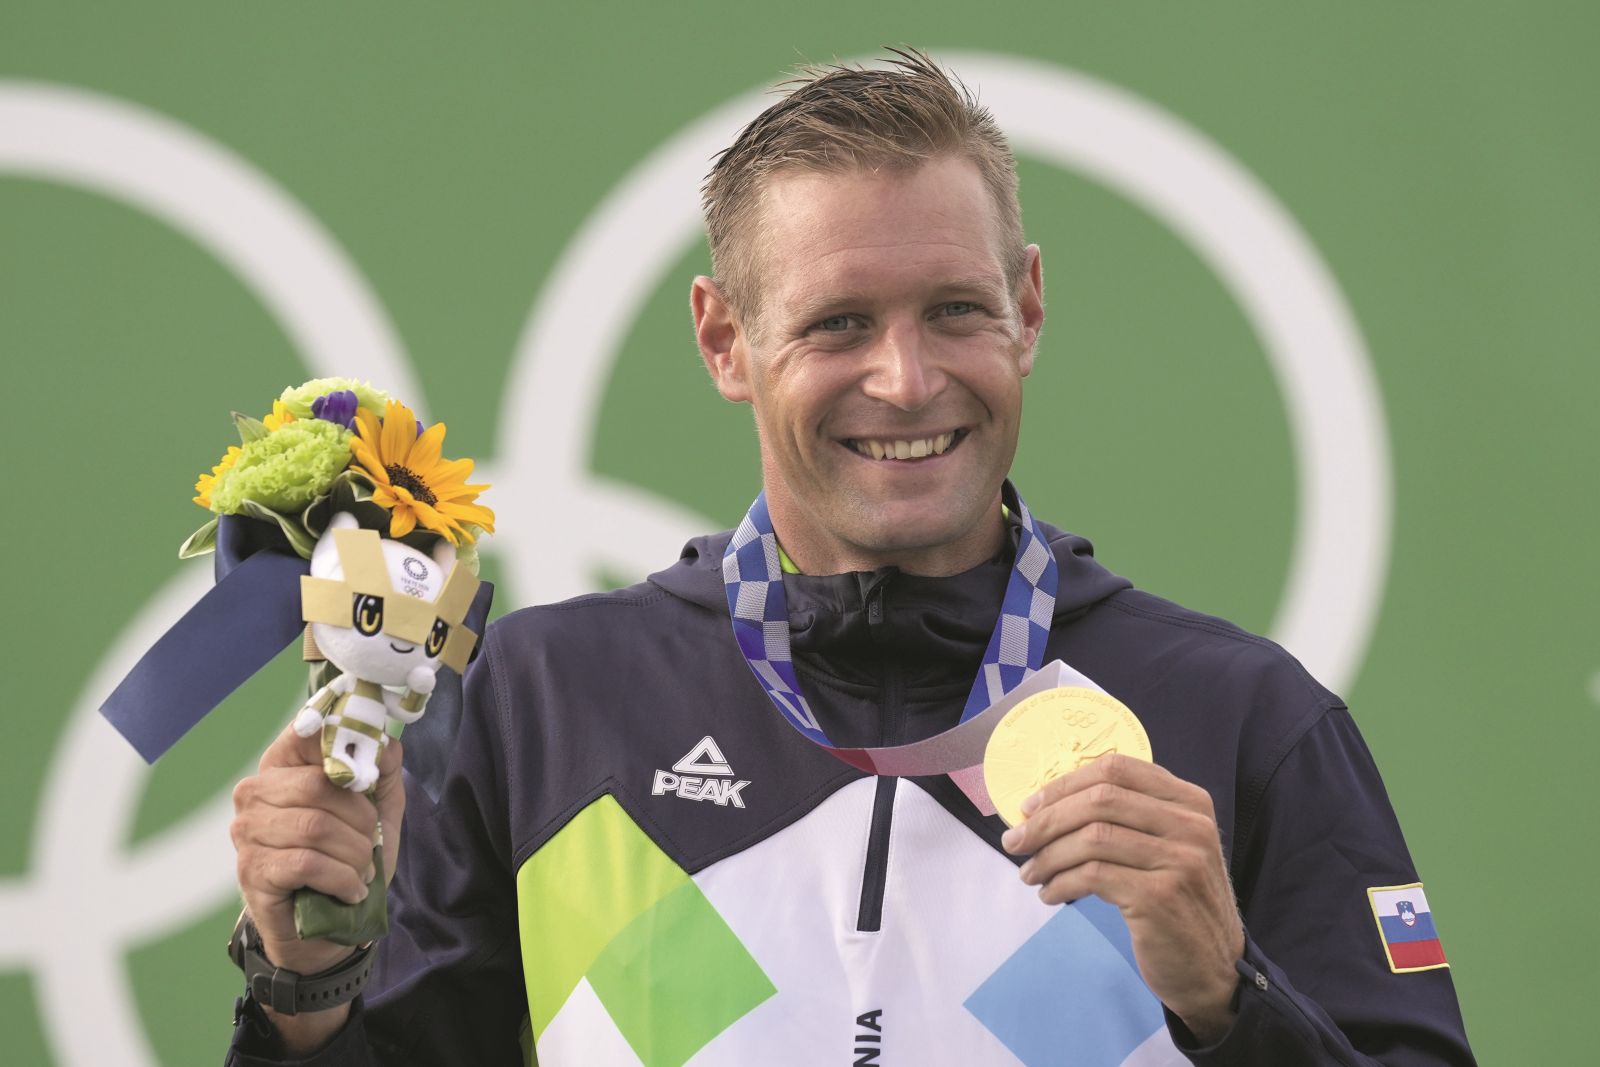 Benjamin Savsek of Slovenia poses with his medal after winning gold in the Men's C1 Canoe Slalom at the 2020 Summer Olympics, Monday, July 26, 2021, in Tokyo, Japan. (AP Photo/Kirsty Wigglesworth)